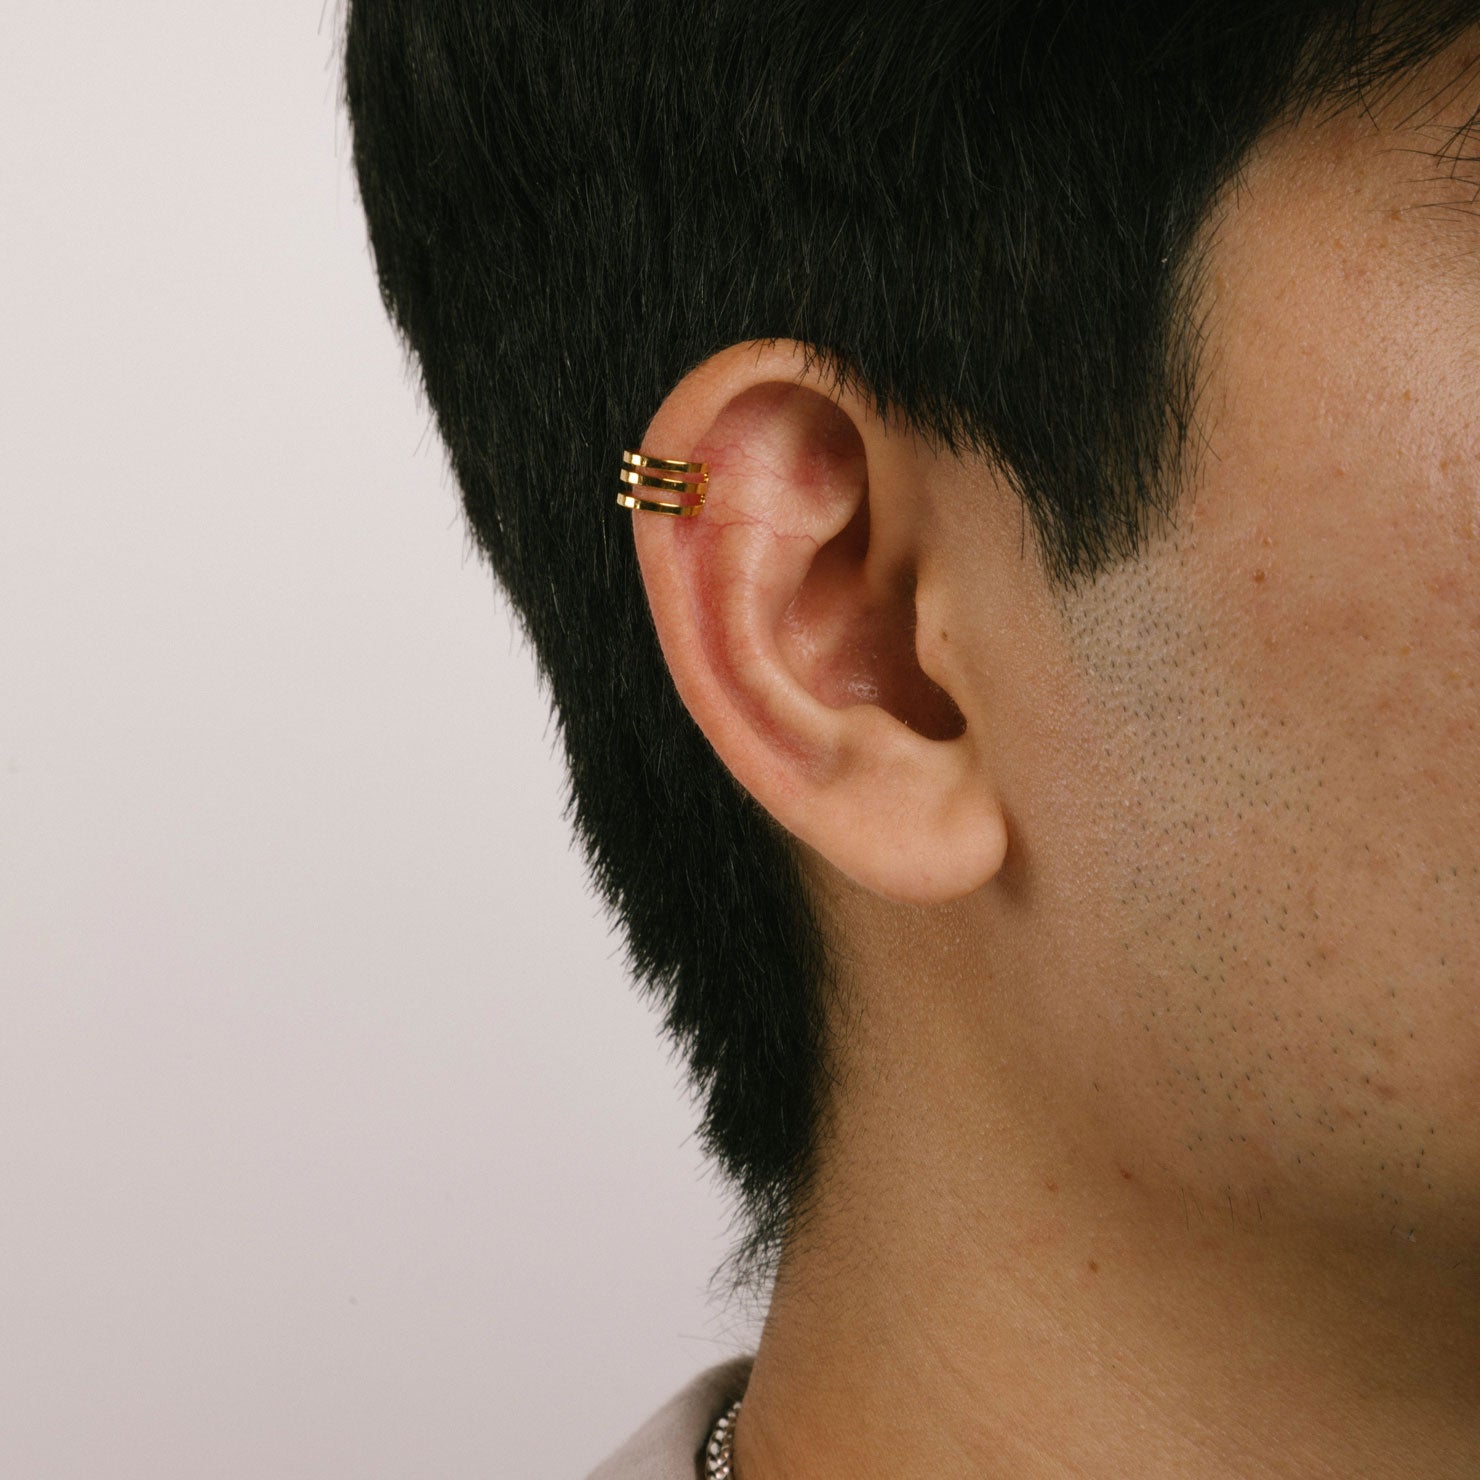 A model wearing the Triple Band Ear Cuff features a secure medium hold, adjustable fit, and non-tarnish, water-resistant stainless steel and titanium construction. Its 9mm diameter and 6mm width makes it ideal for all ear types, including thick/large, sensitive, small/thin, and stretched/healing ears. Average comfortable wear duration is up to 24 hours for one piece. Intended to be worn on the helix of the ear.